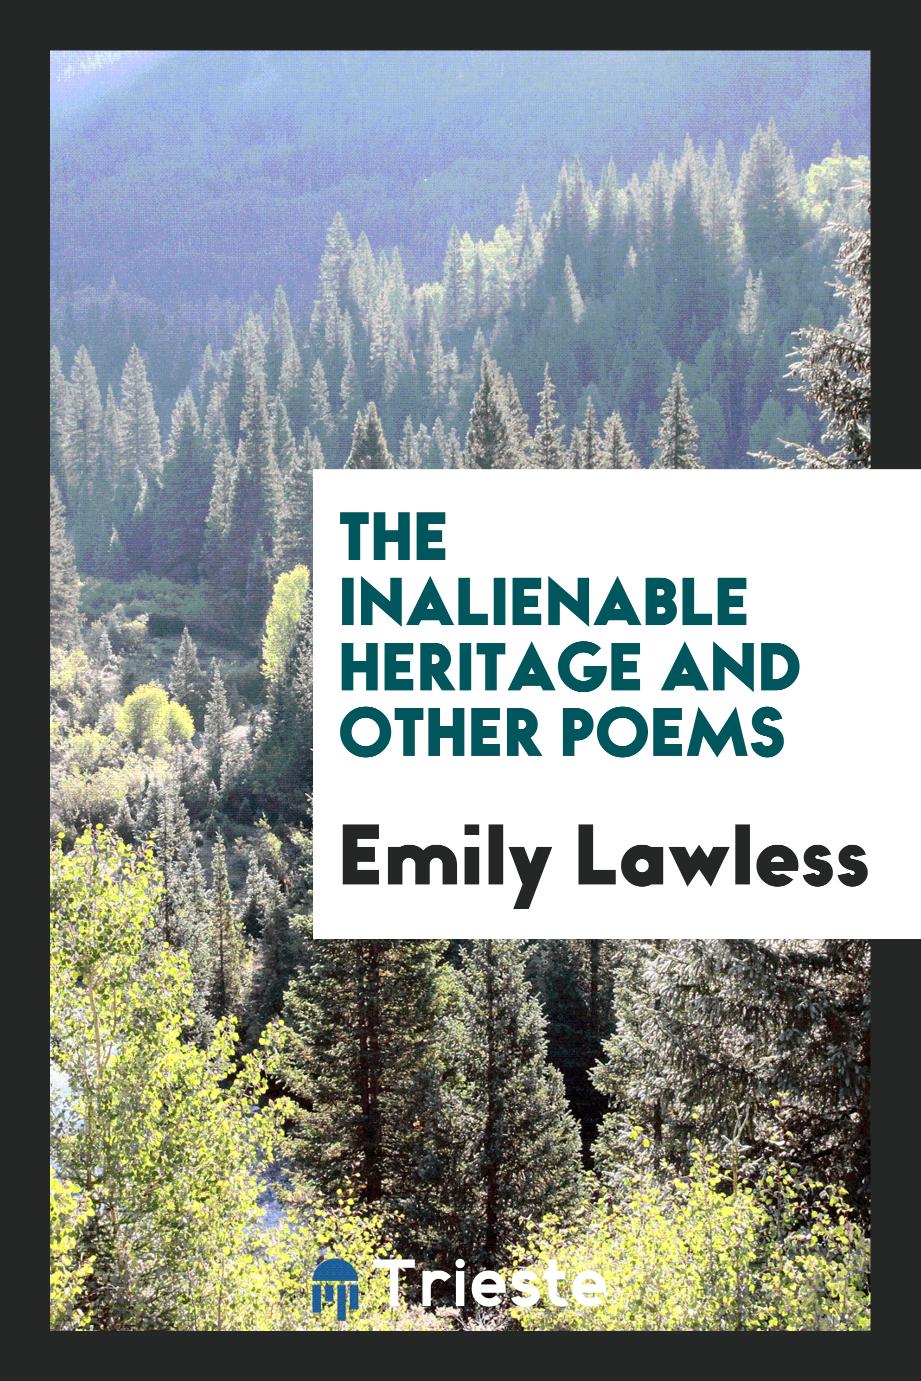 The inalienable heritage and other poems